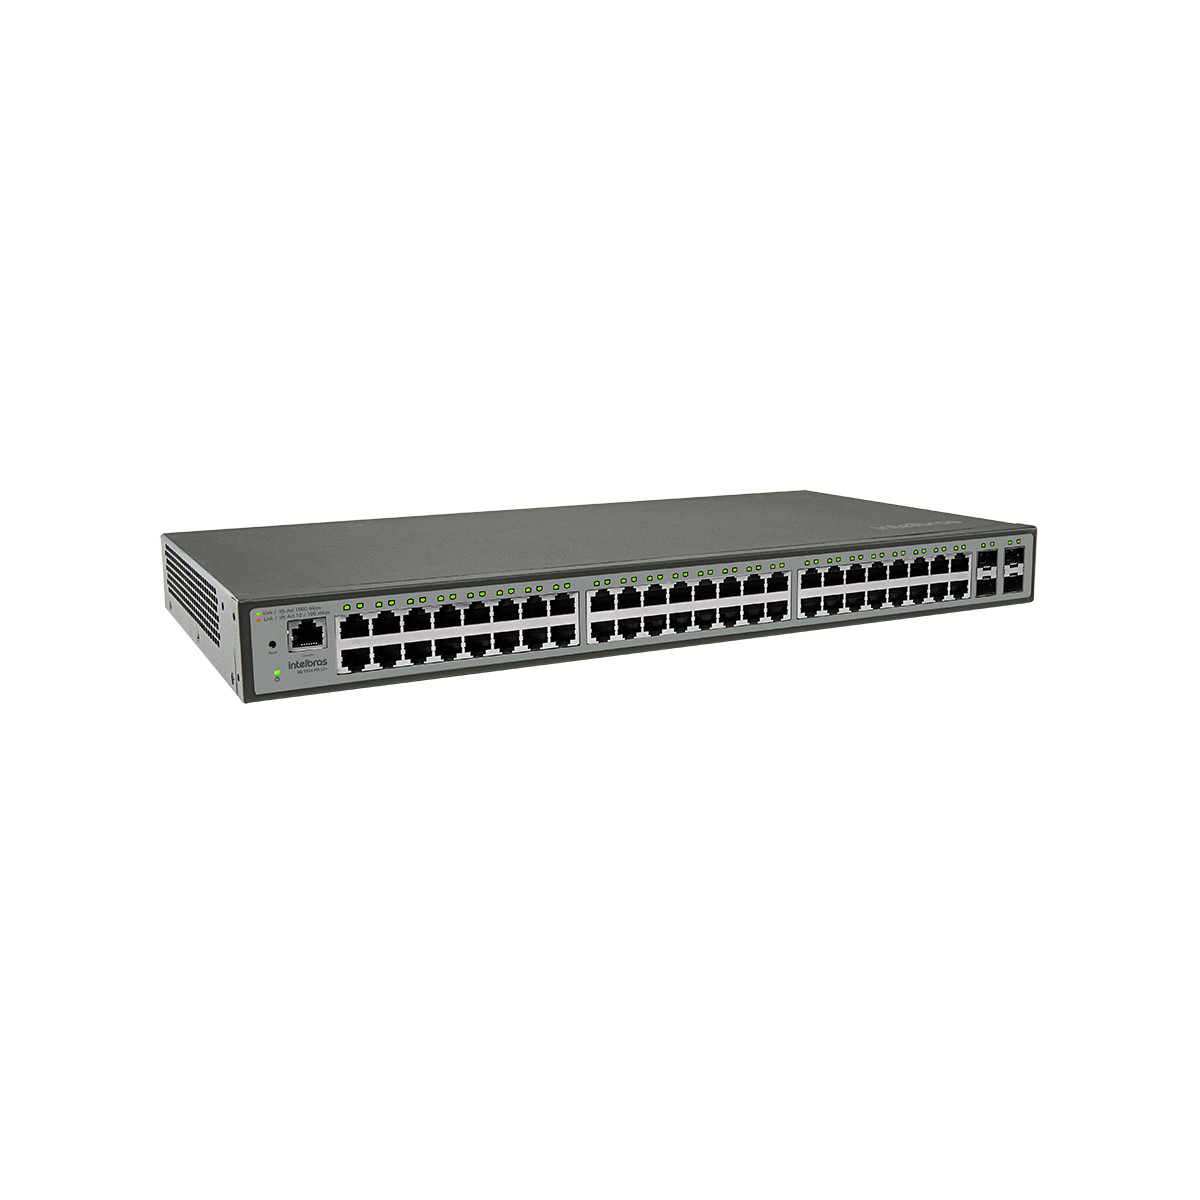 SWITCH GERENCIAVEL 48P G + 4PGBIC - SG 5204 MR L2+